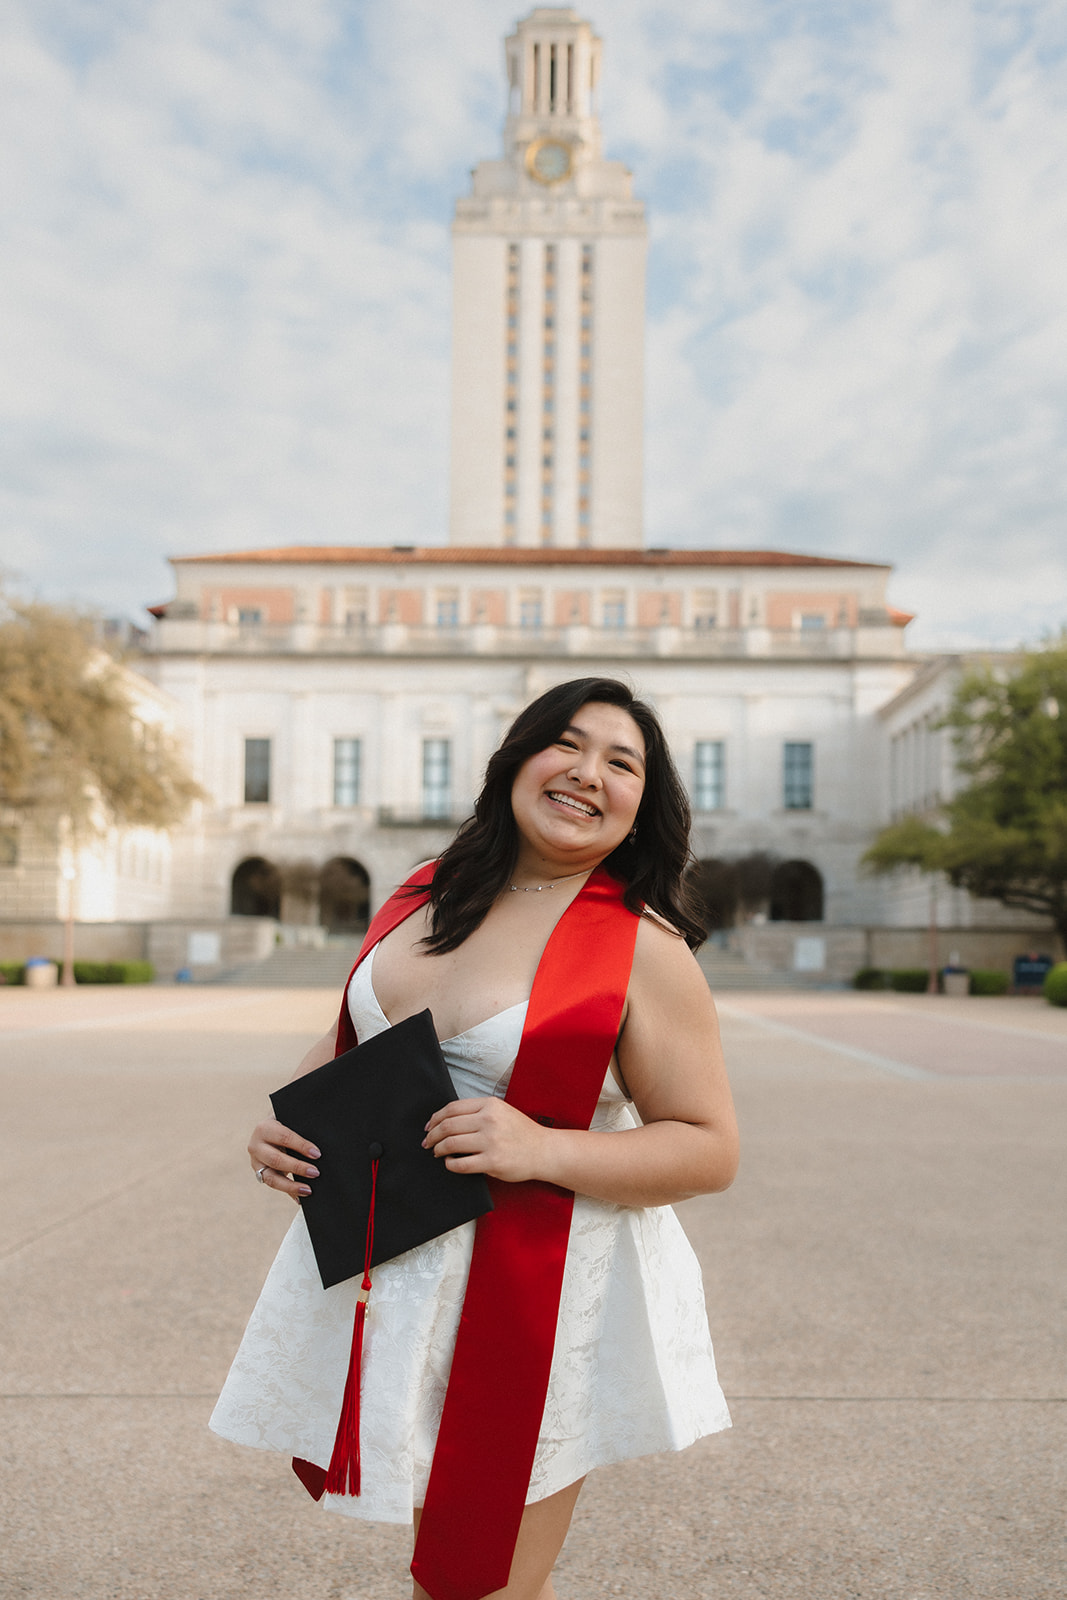 UT Austin senior pictures in front of the tower